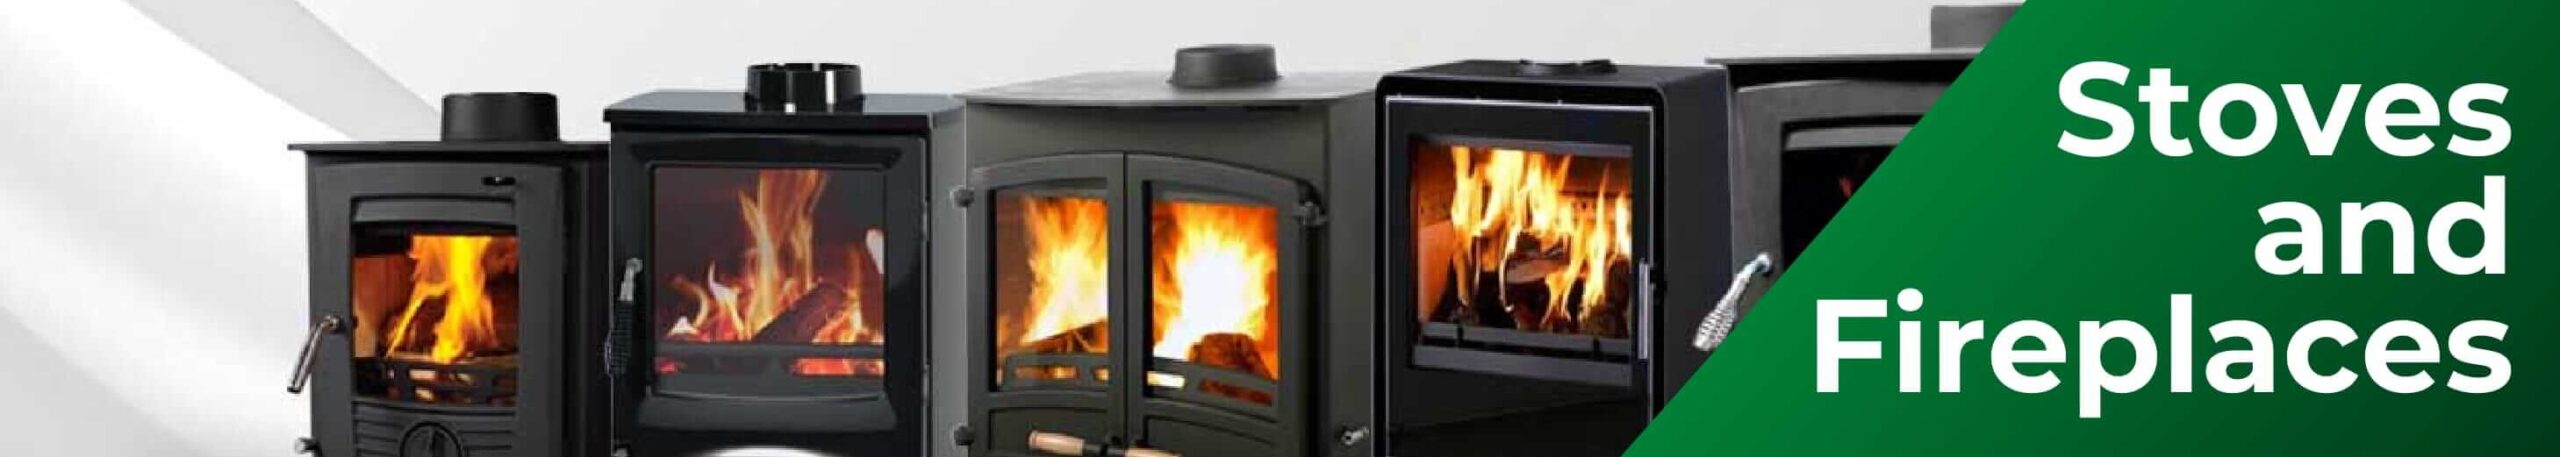 Stoves and Fireplaces Banner